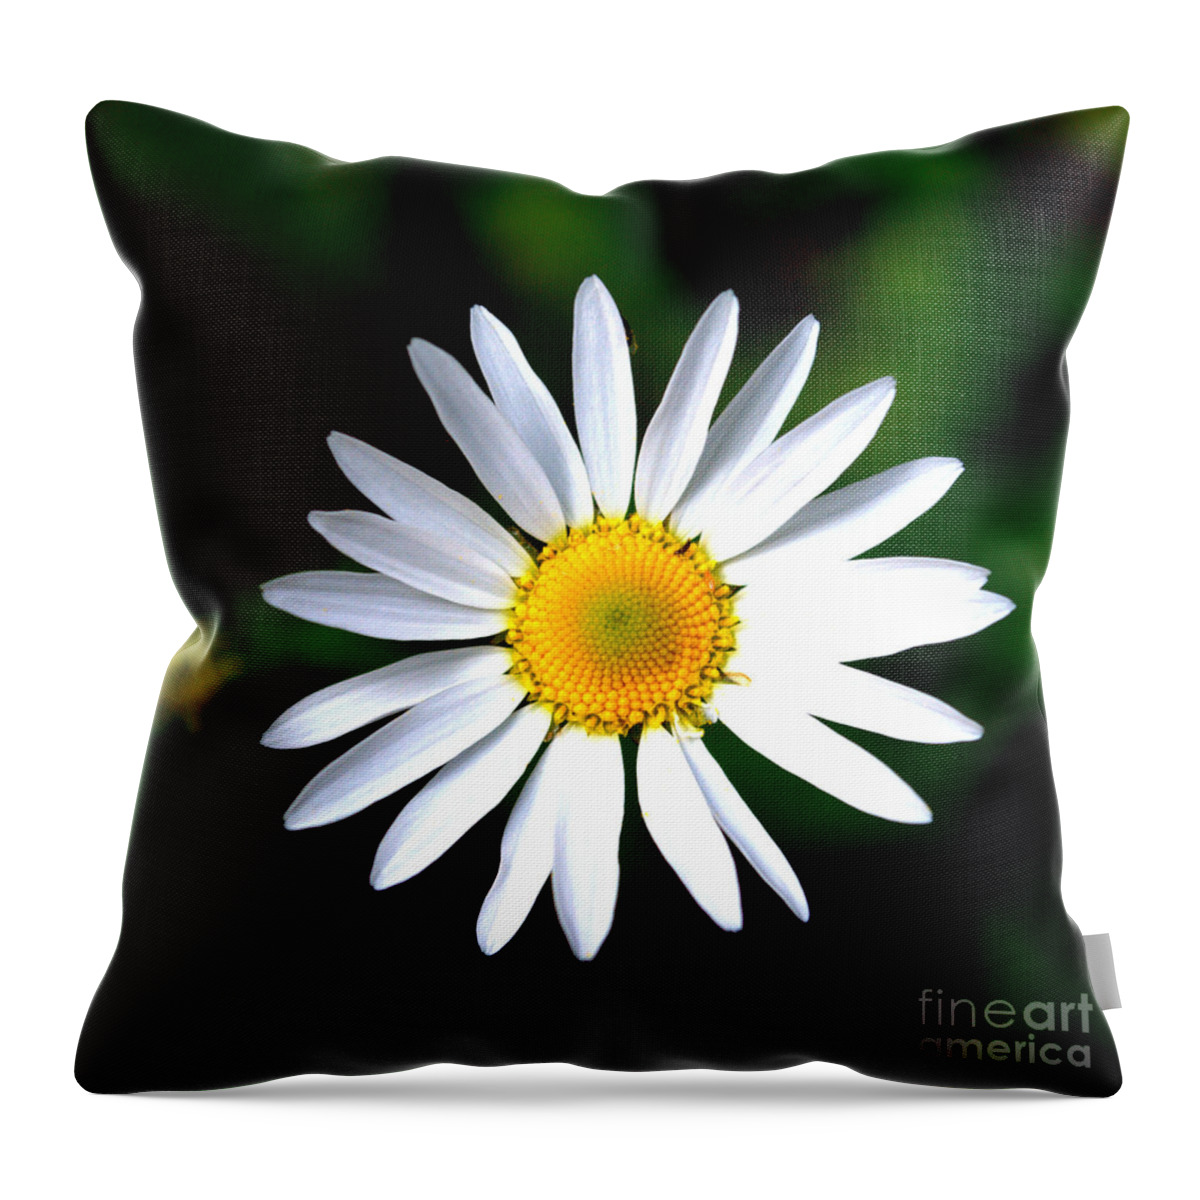 Daisy Throw Pillow featuring the photograph Bright Daisy by Anjanette Douglas